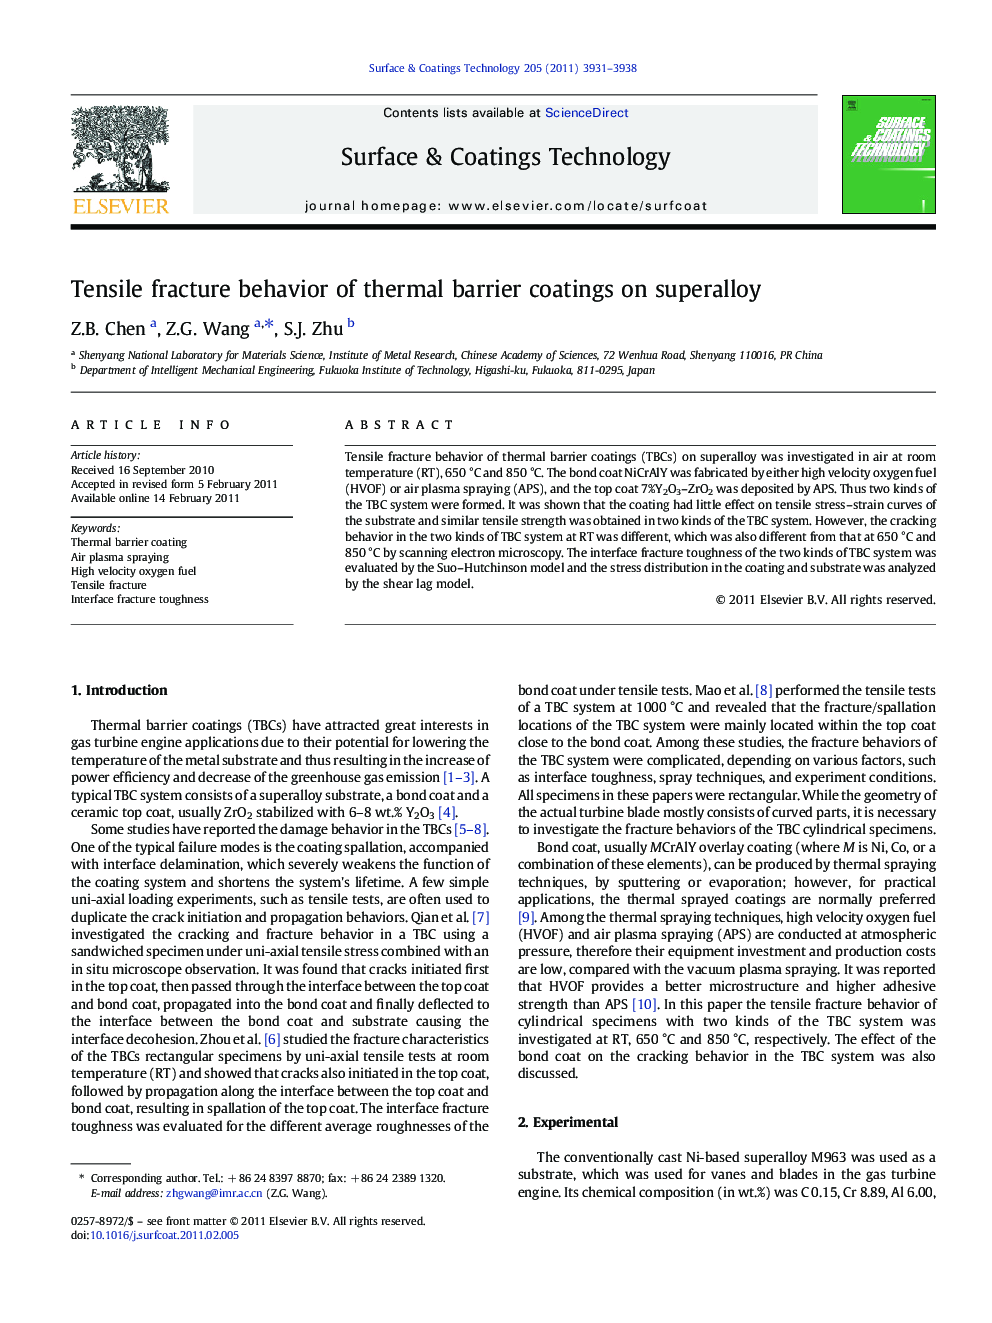 Tensile fracture behavior of thermal barrier coatings on superalloy